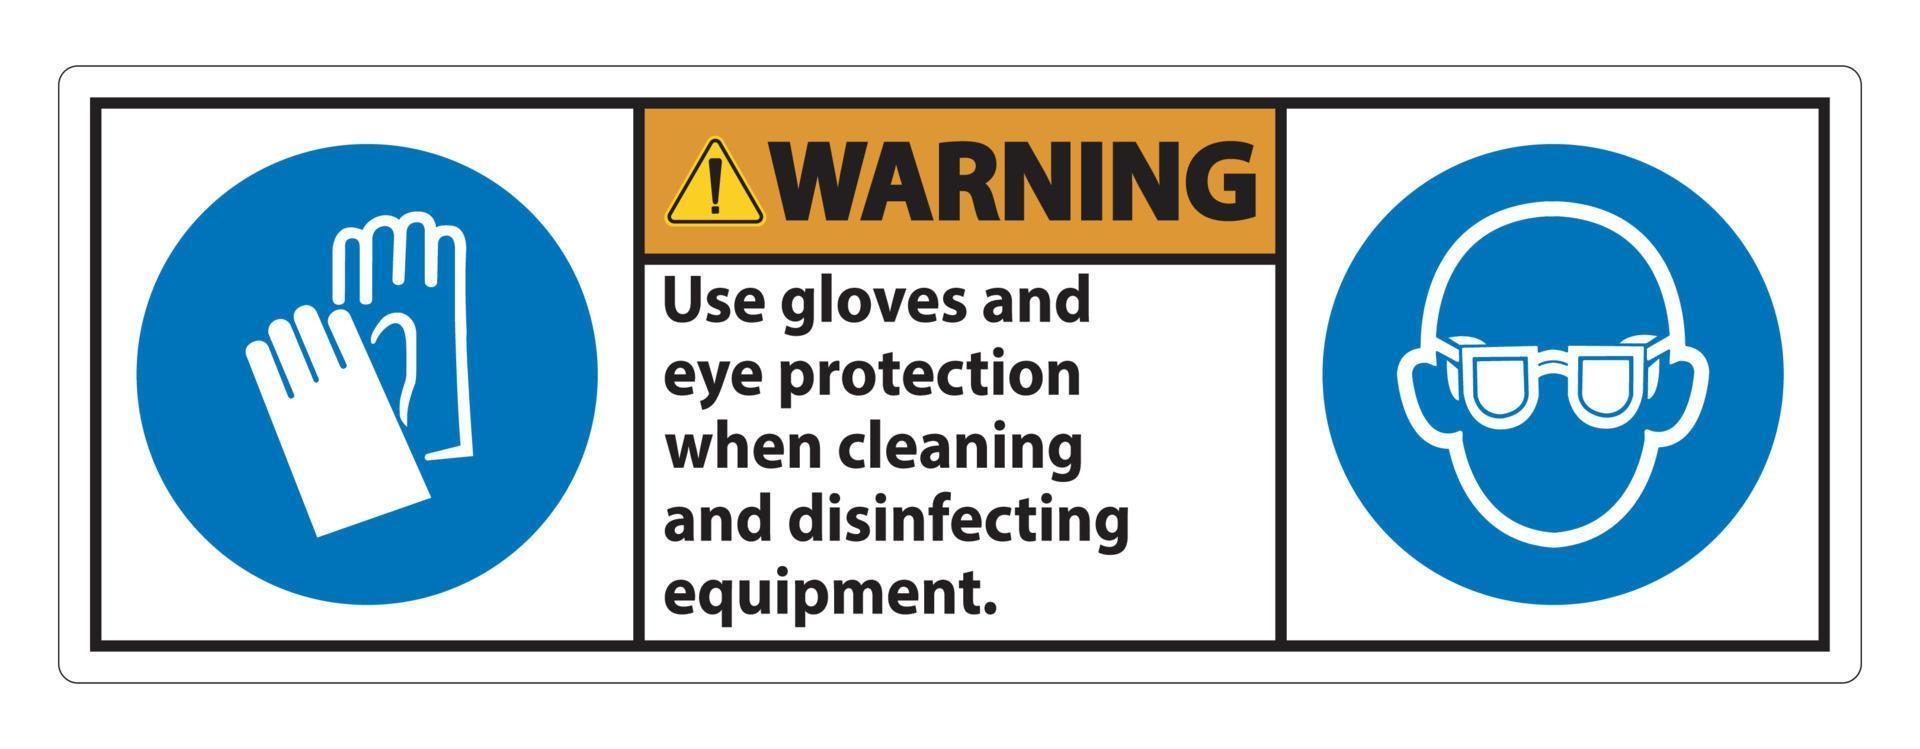 Warning Use Gloves And Eye Protection Sign on white background vector